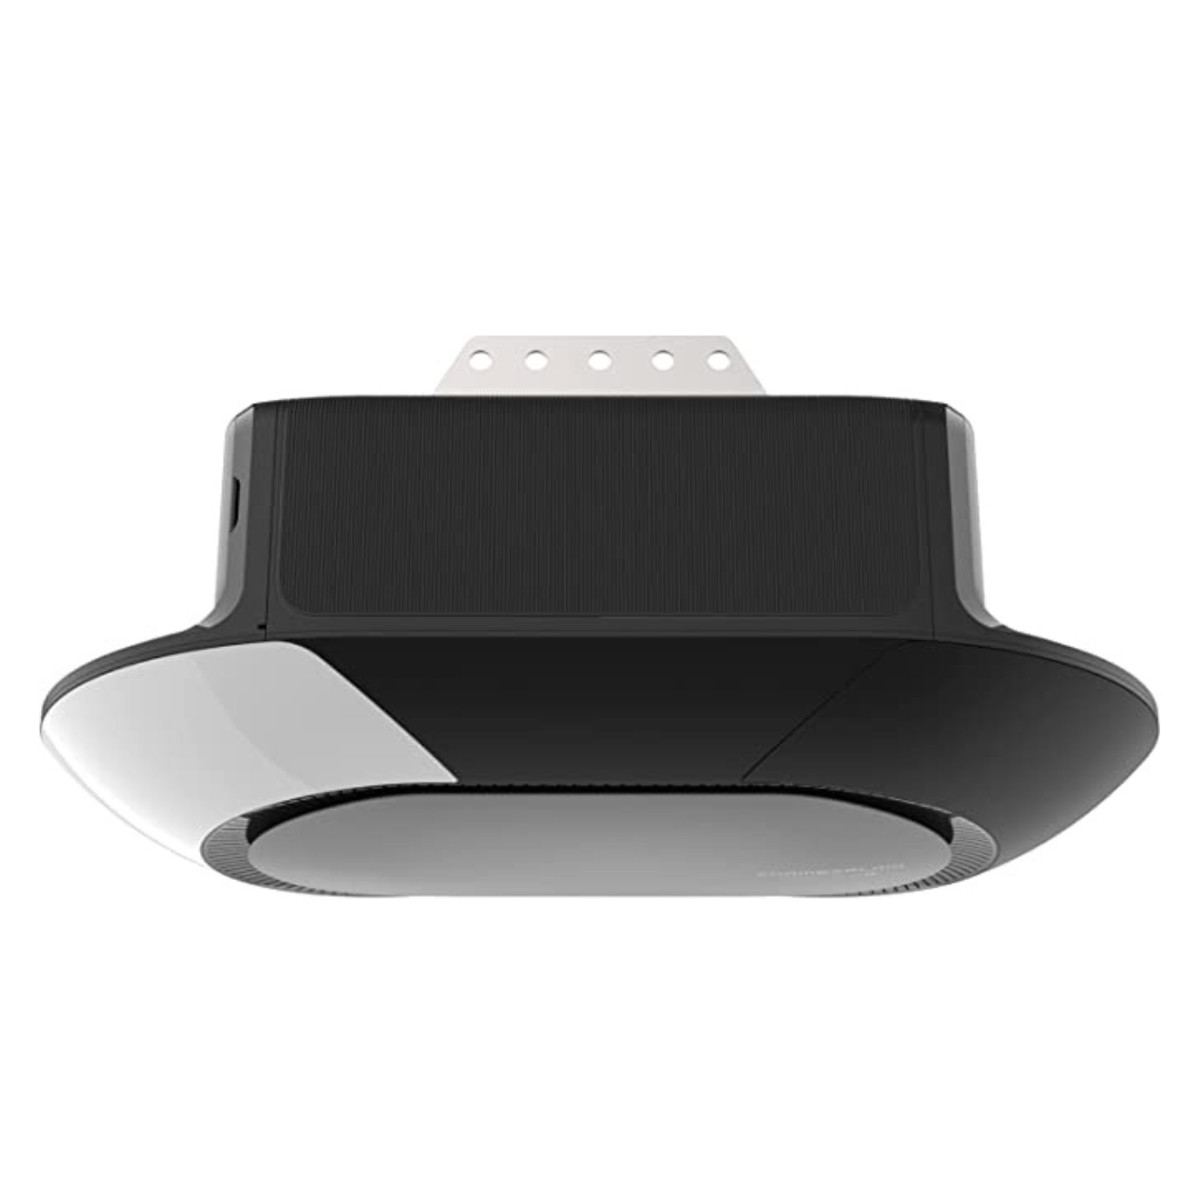 Black smartphone-controlled garage door opener that attaches to ceiling.